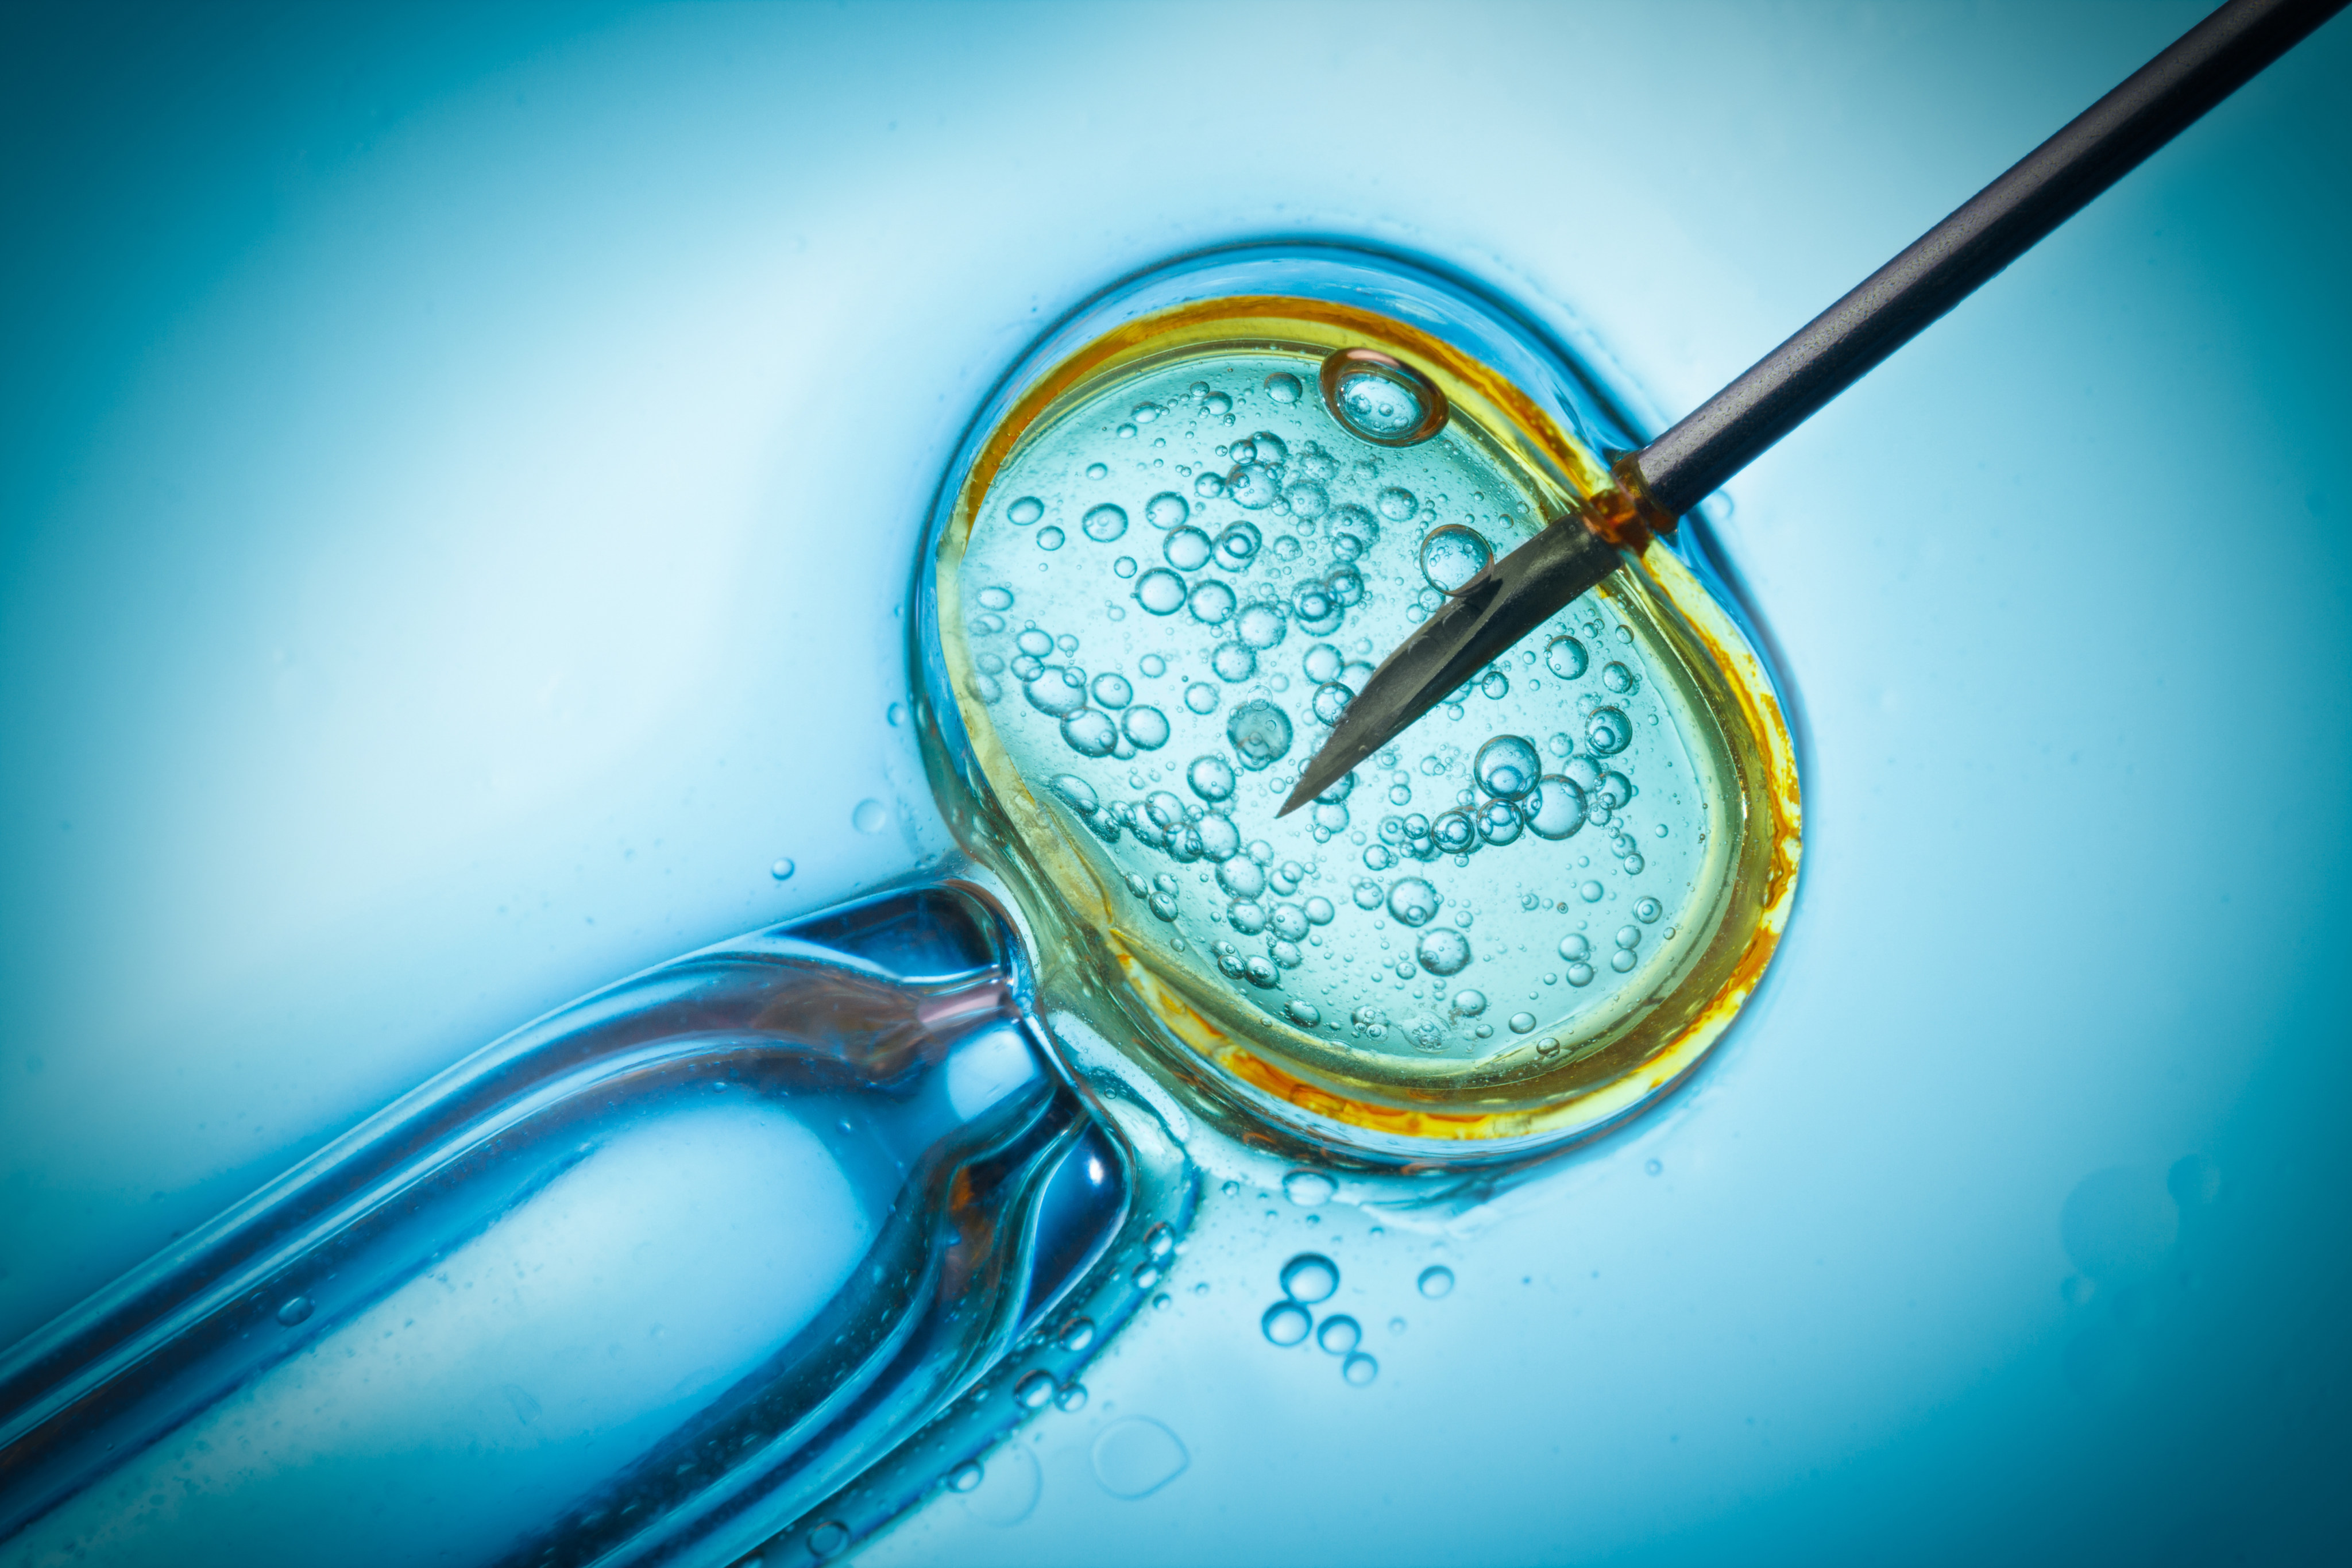 Reproductive medicine experts say longer storage time for frozen eggs, embryos and sperm is unlikely to increase Hong Kong’s falling birth rate. Photo: Shutterstock